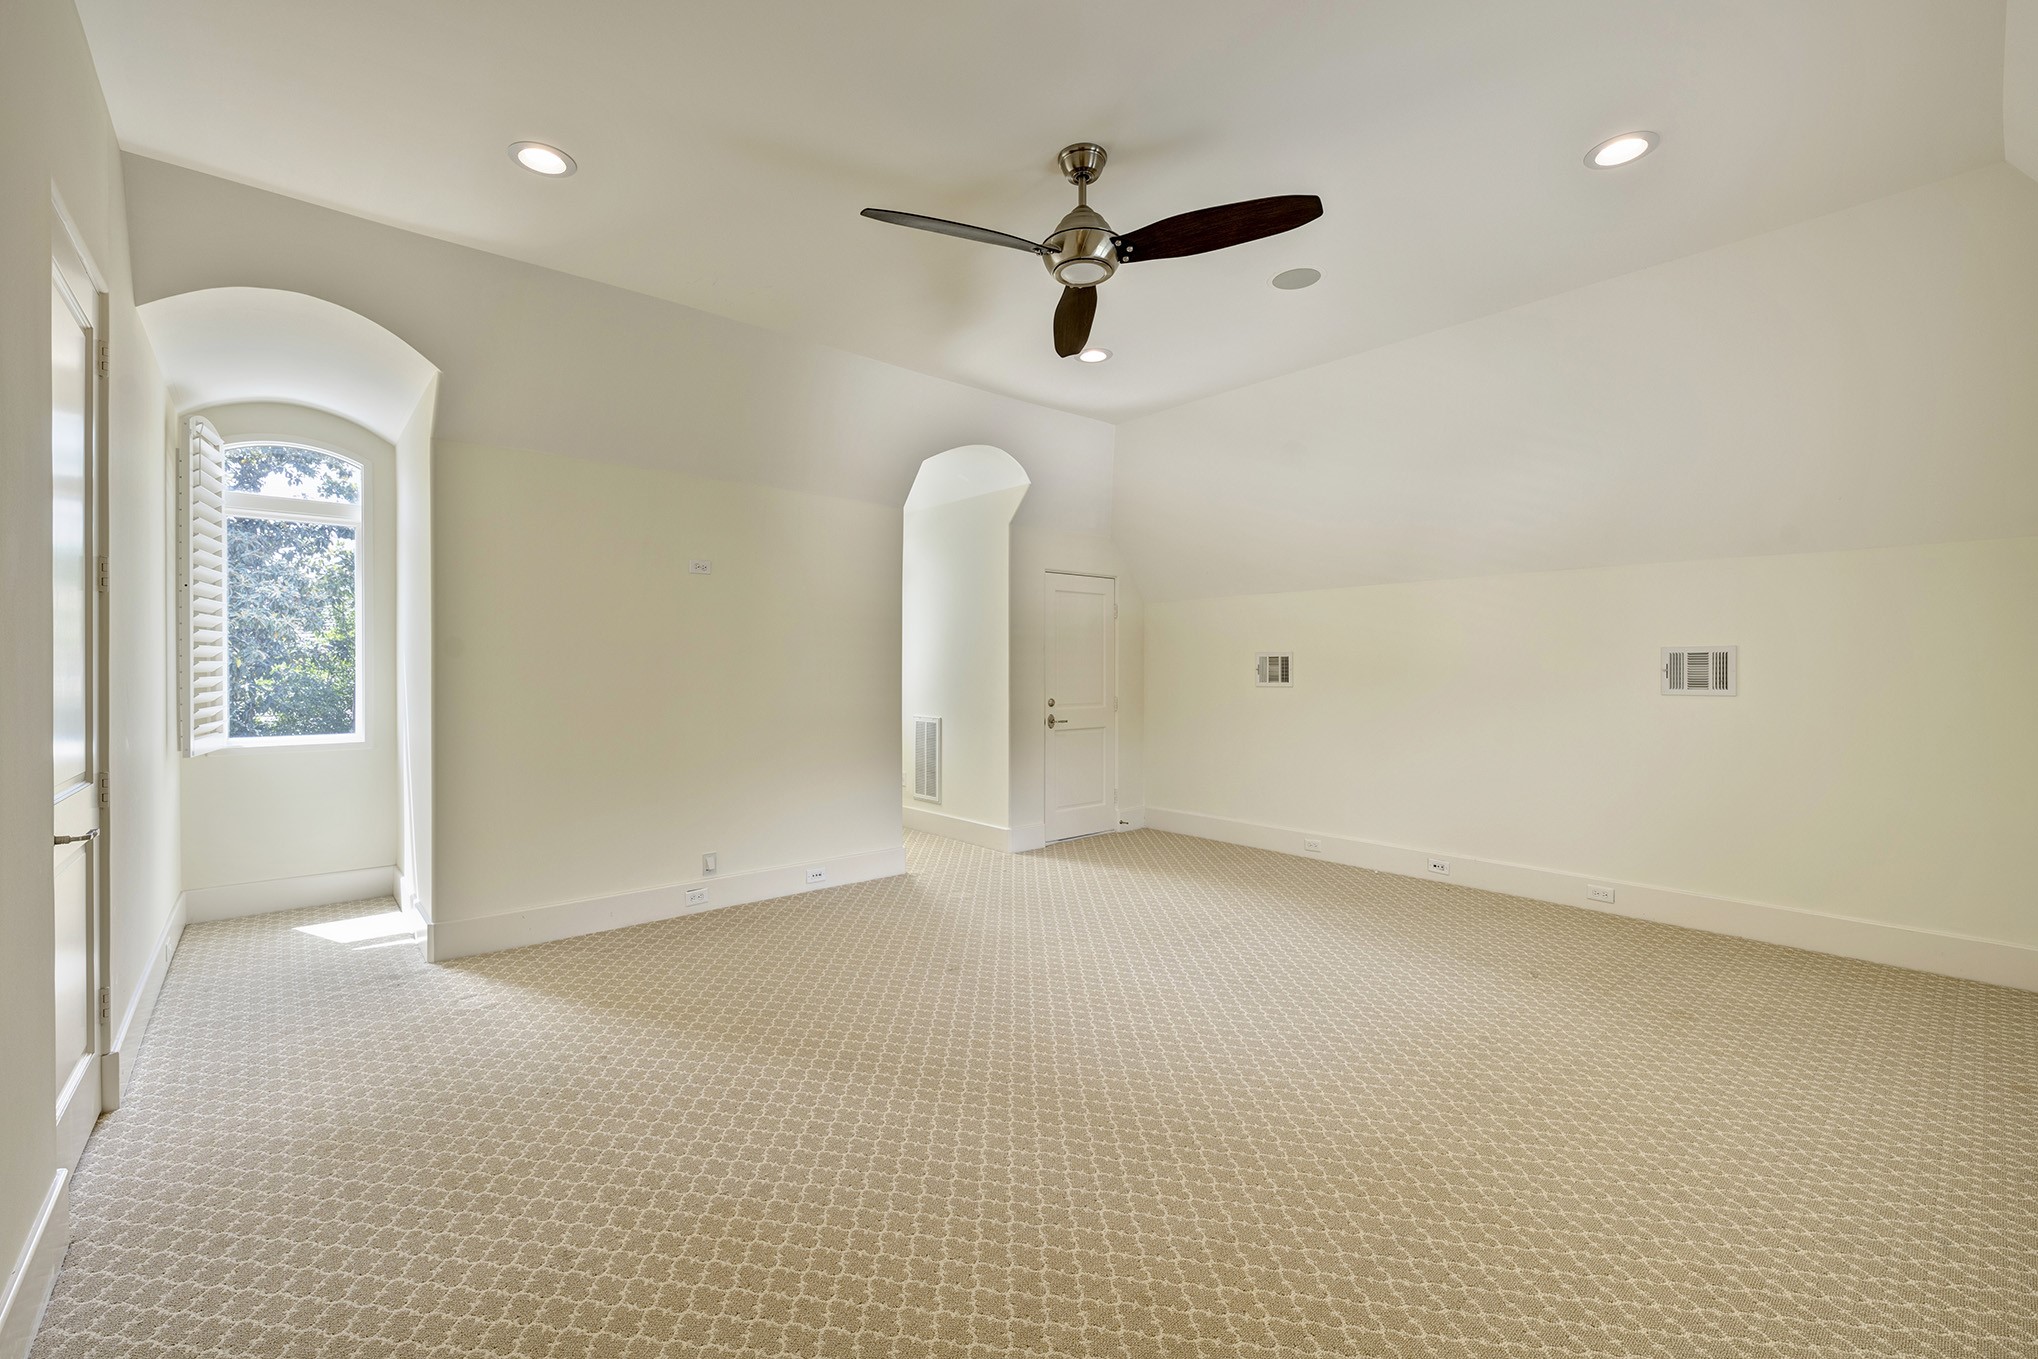 Sixth bedroom has full bath but could be great game room, exercise room or craft room.